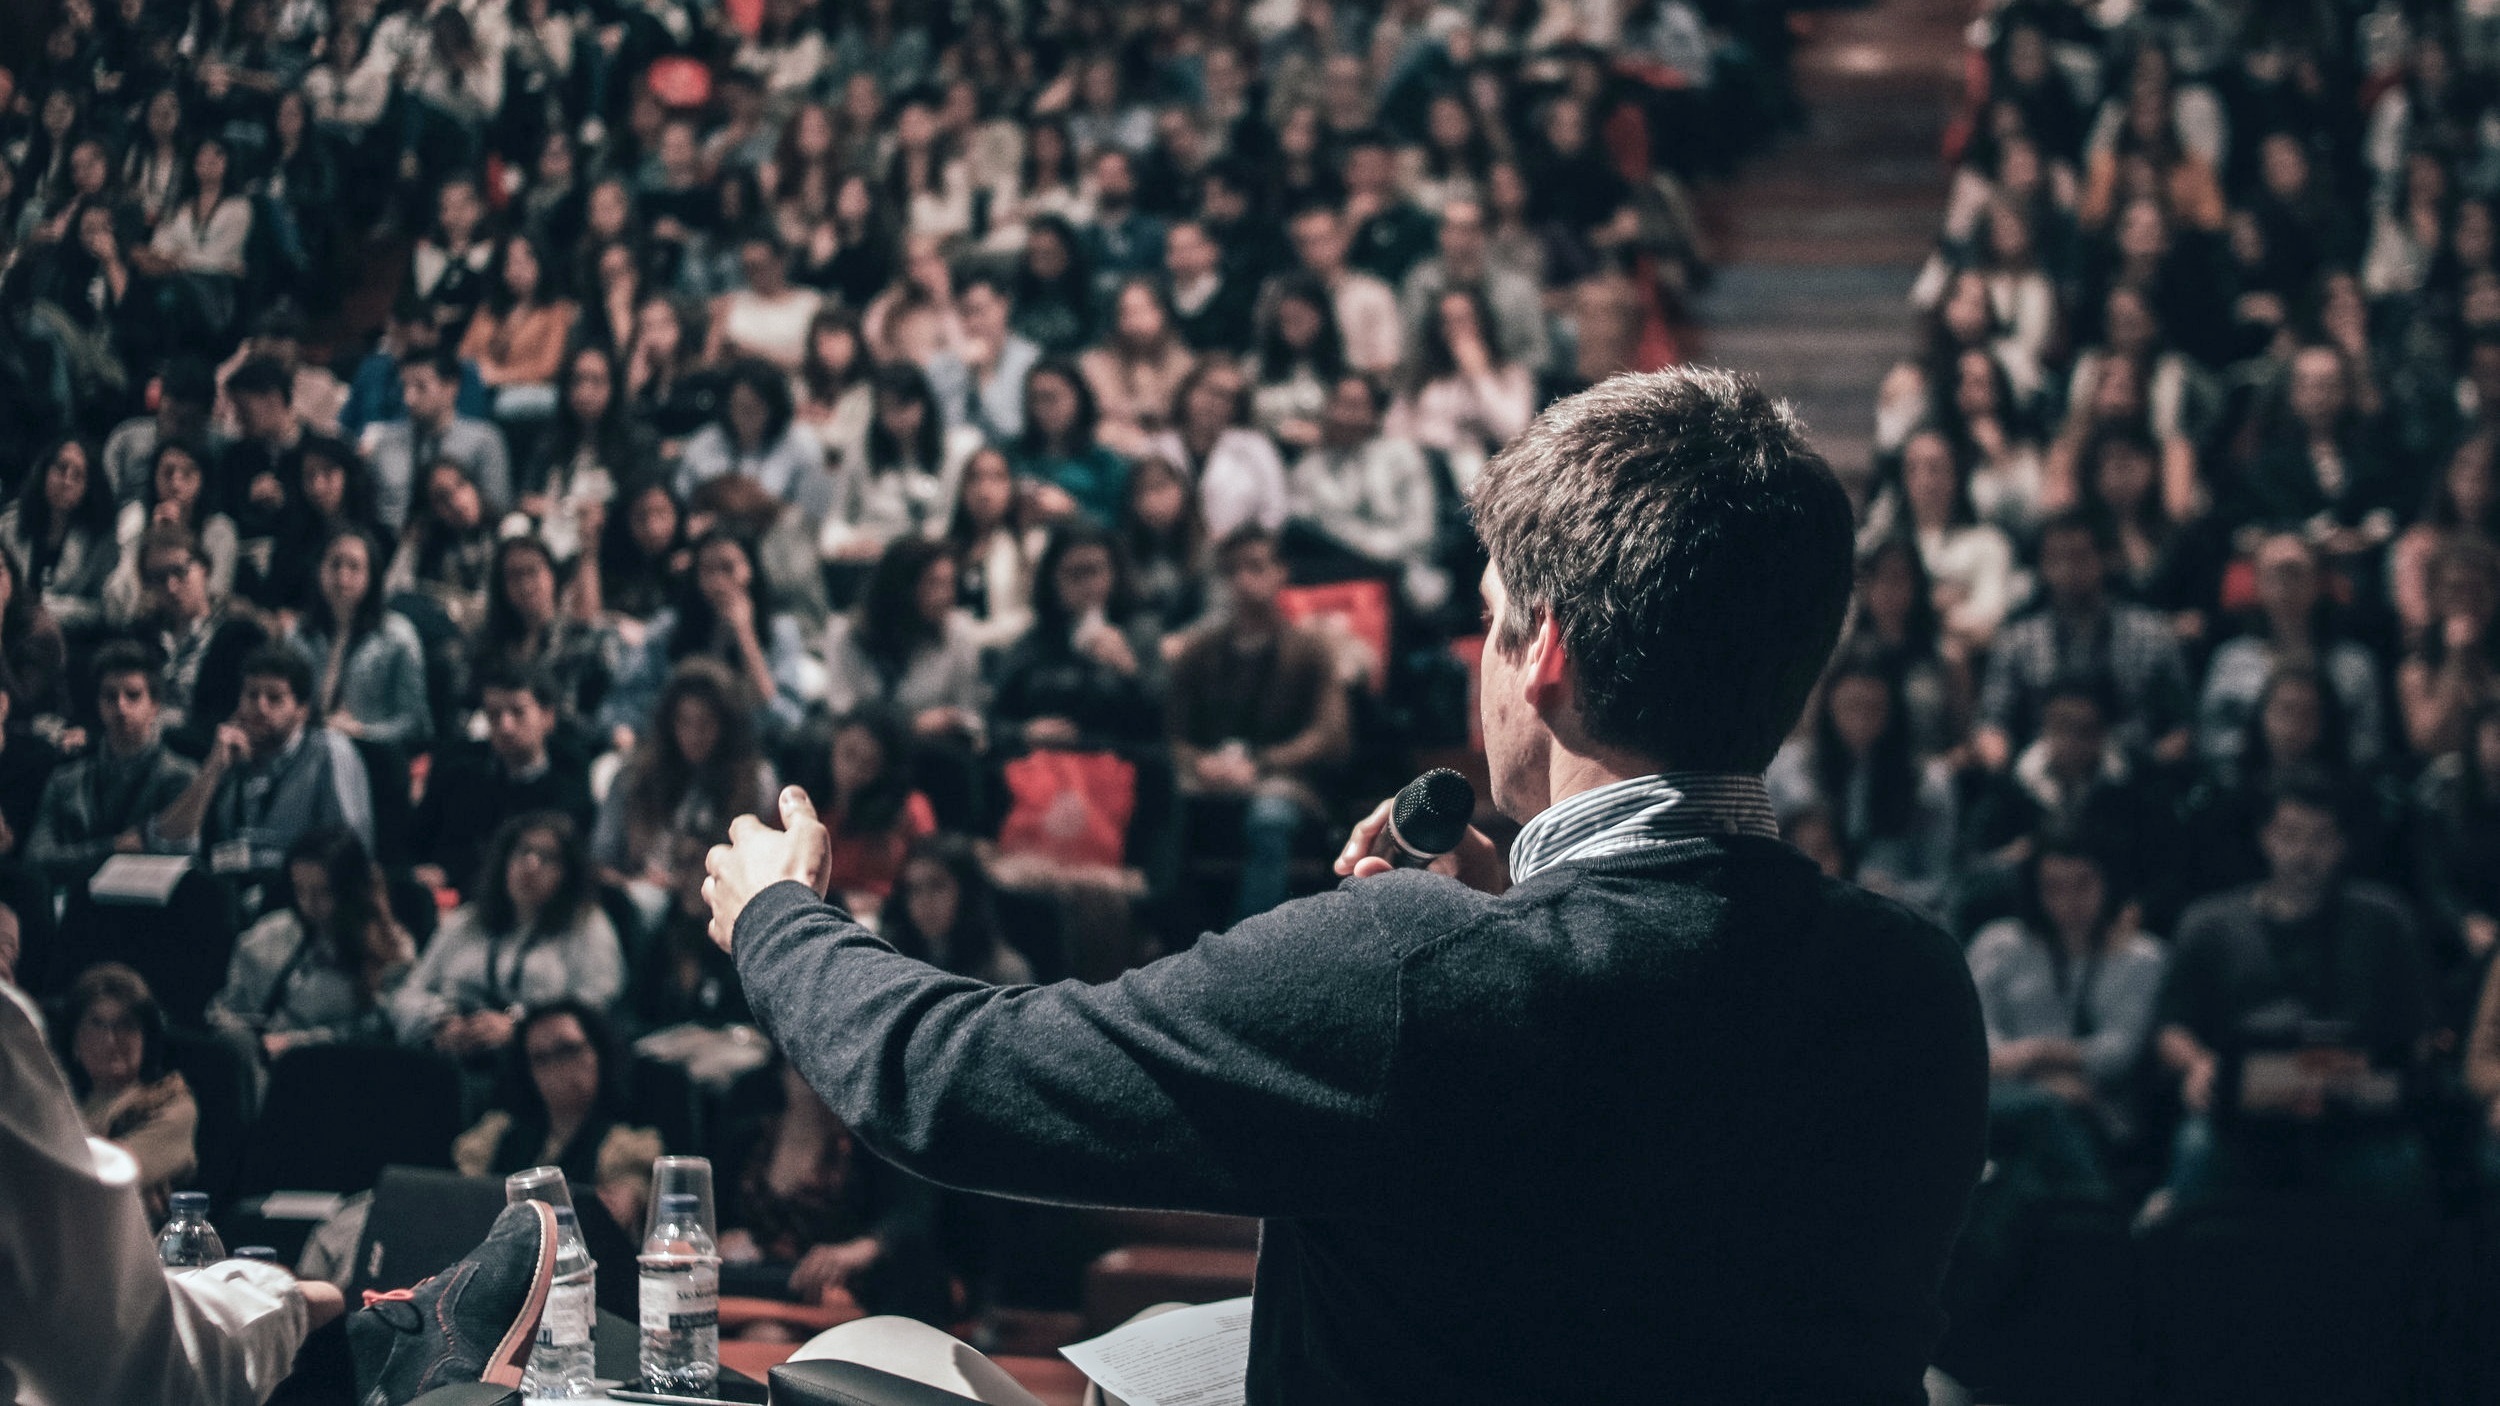 HOW TO BE A BETTER PUBLIC SPEAKER